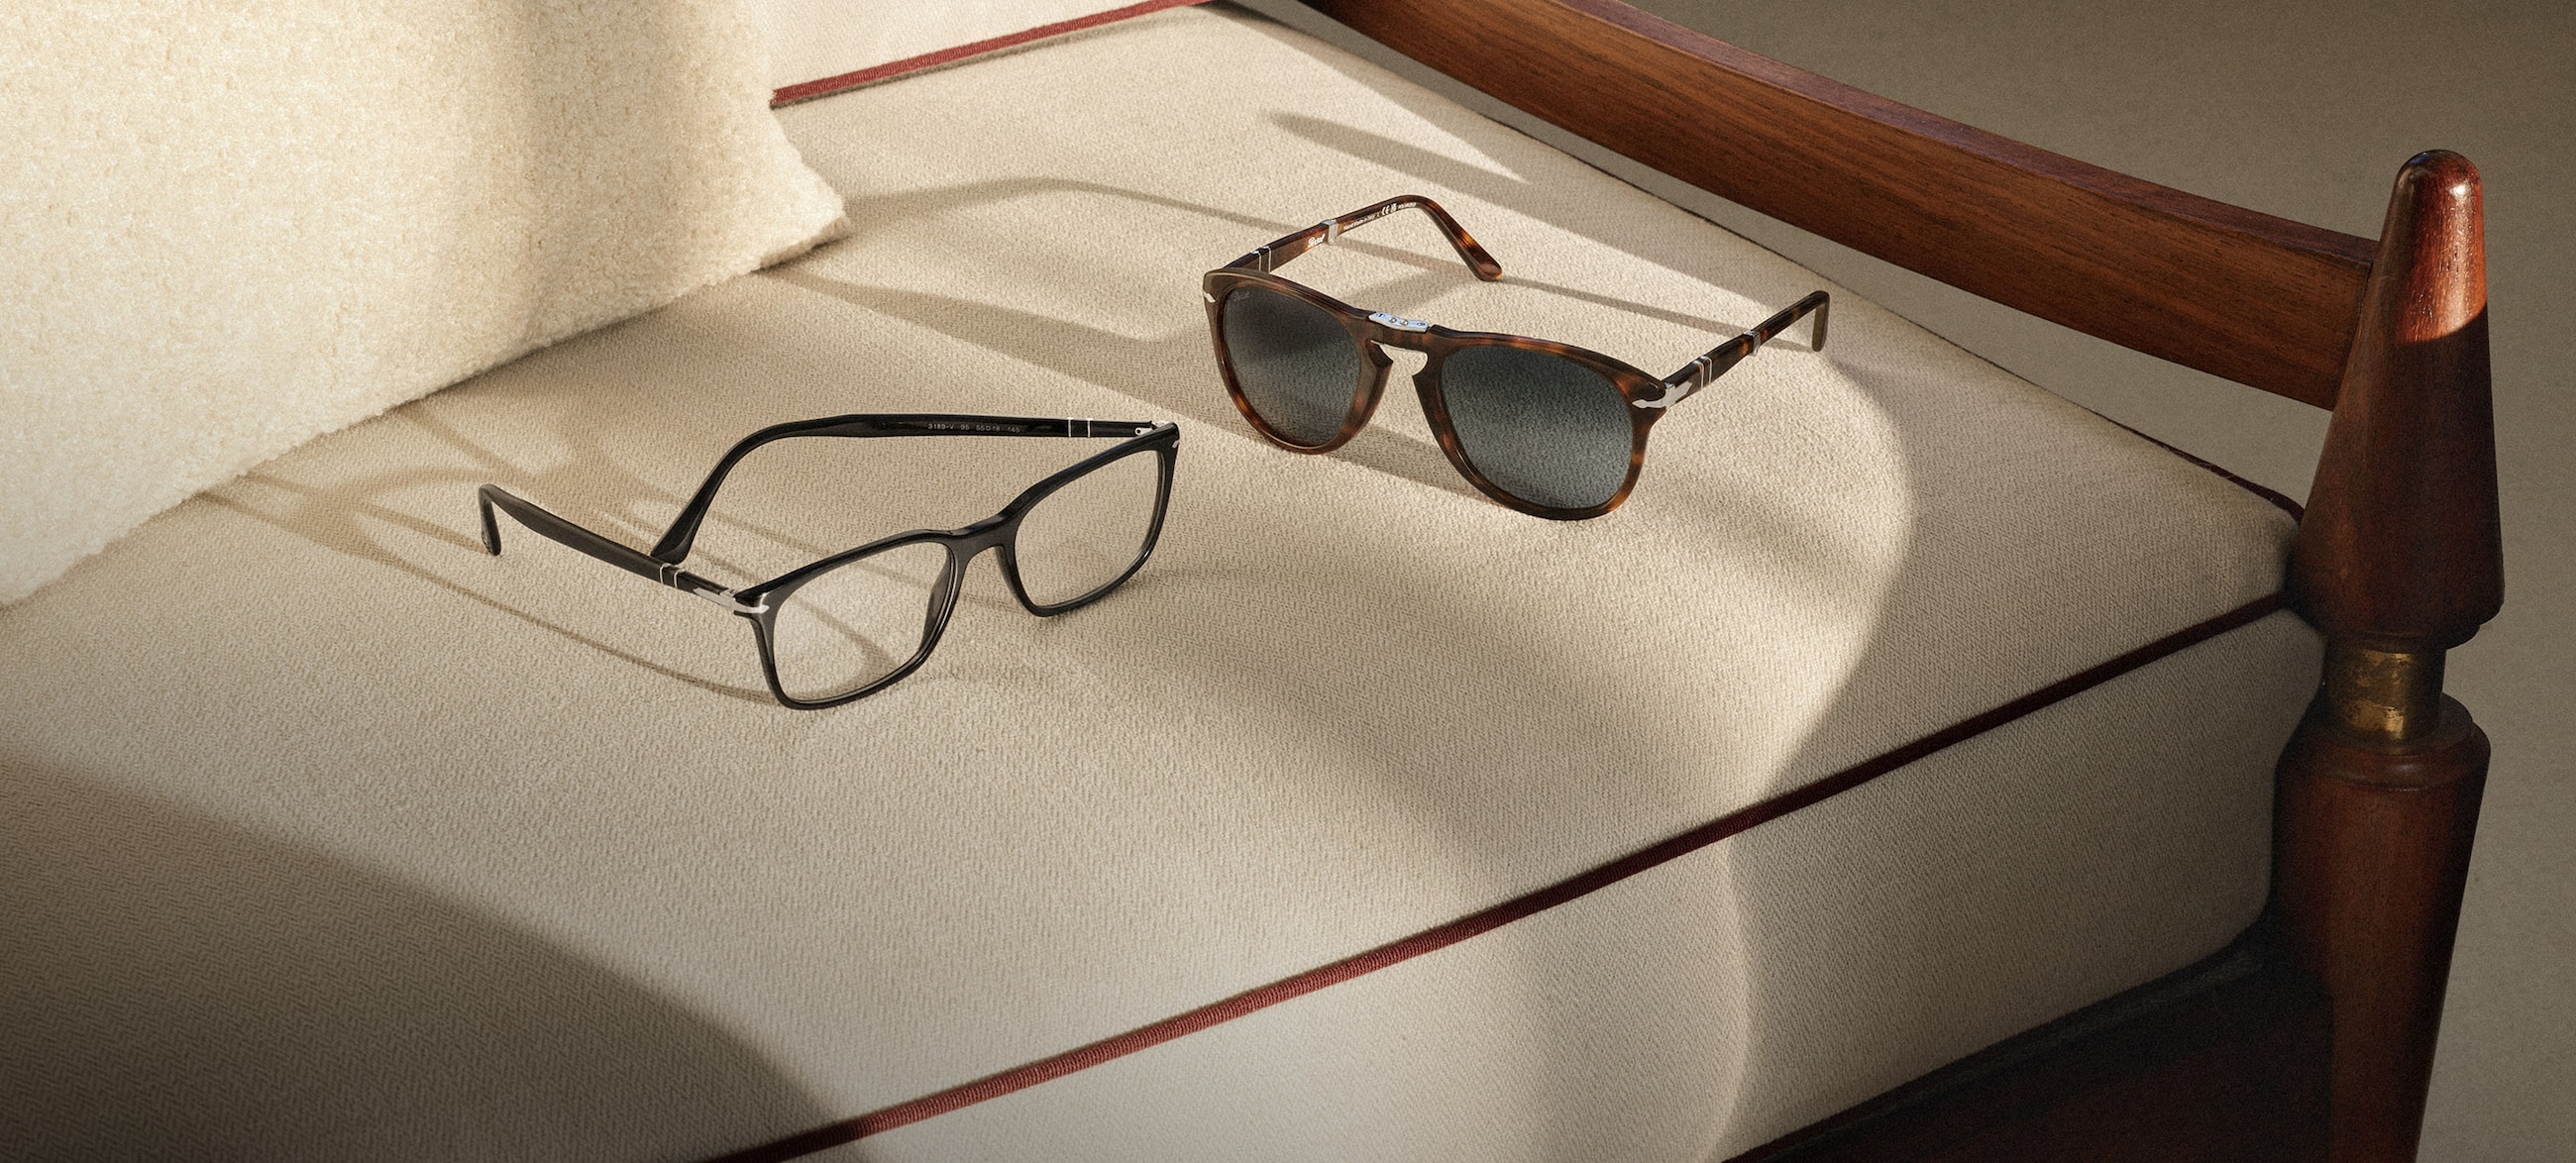 Persol® Eyewear - Persol® Official Store Persol USA